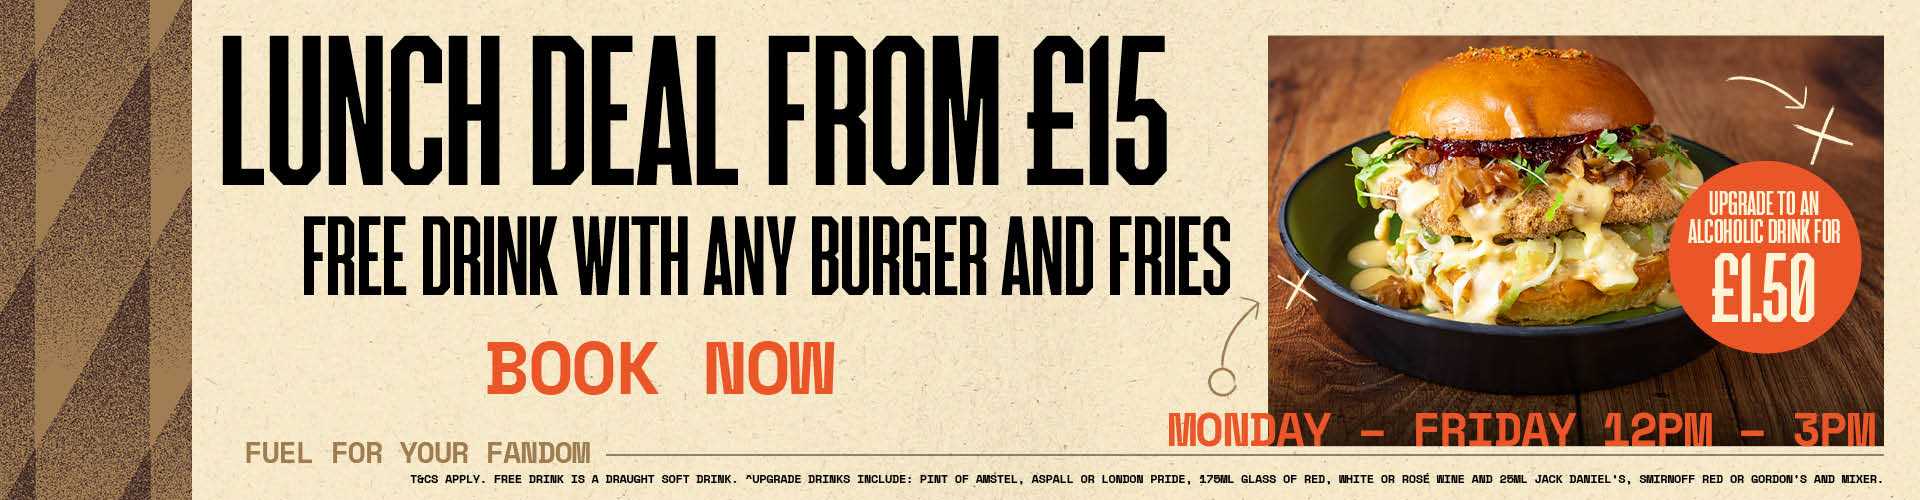 Lunch and Drink Offer in Leicester Square